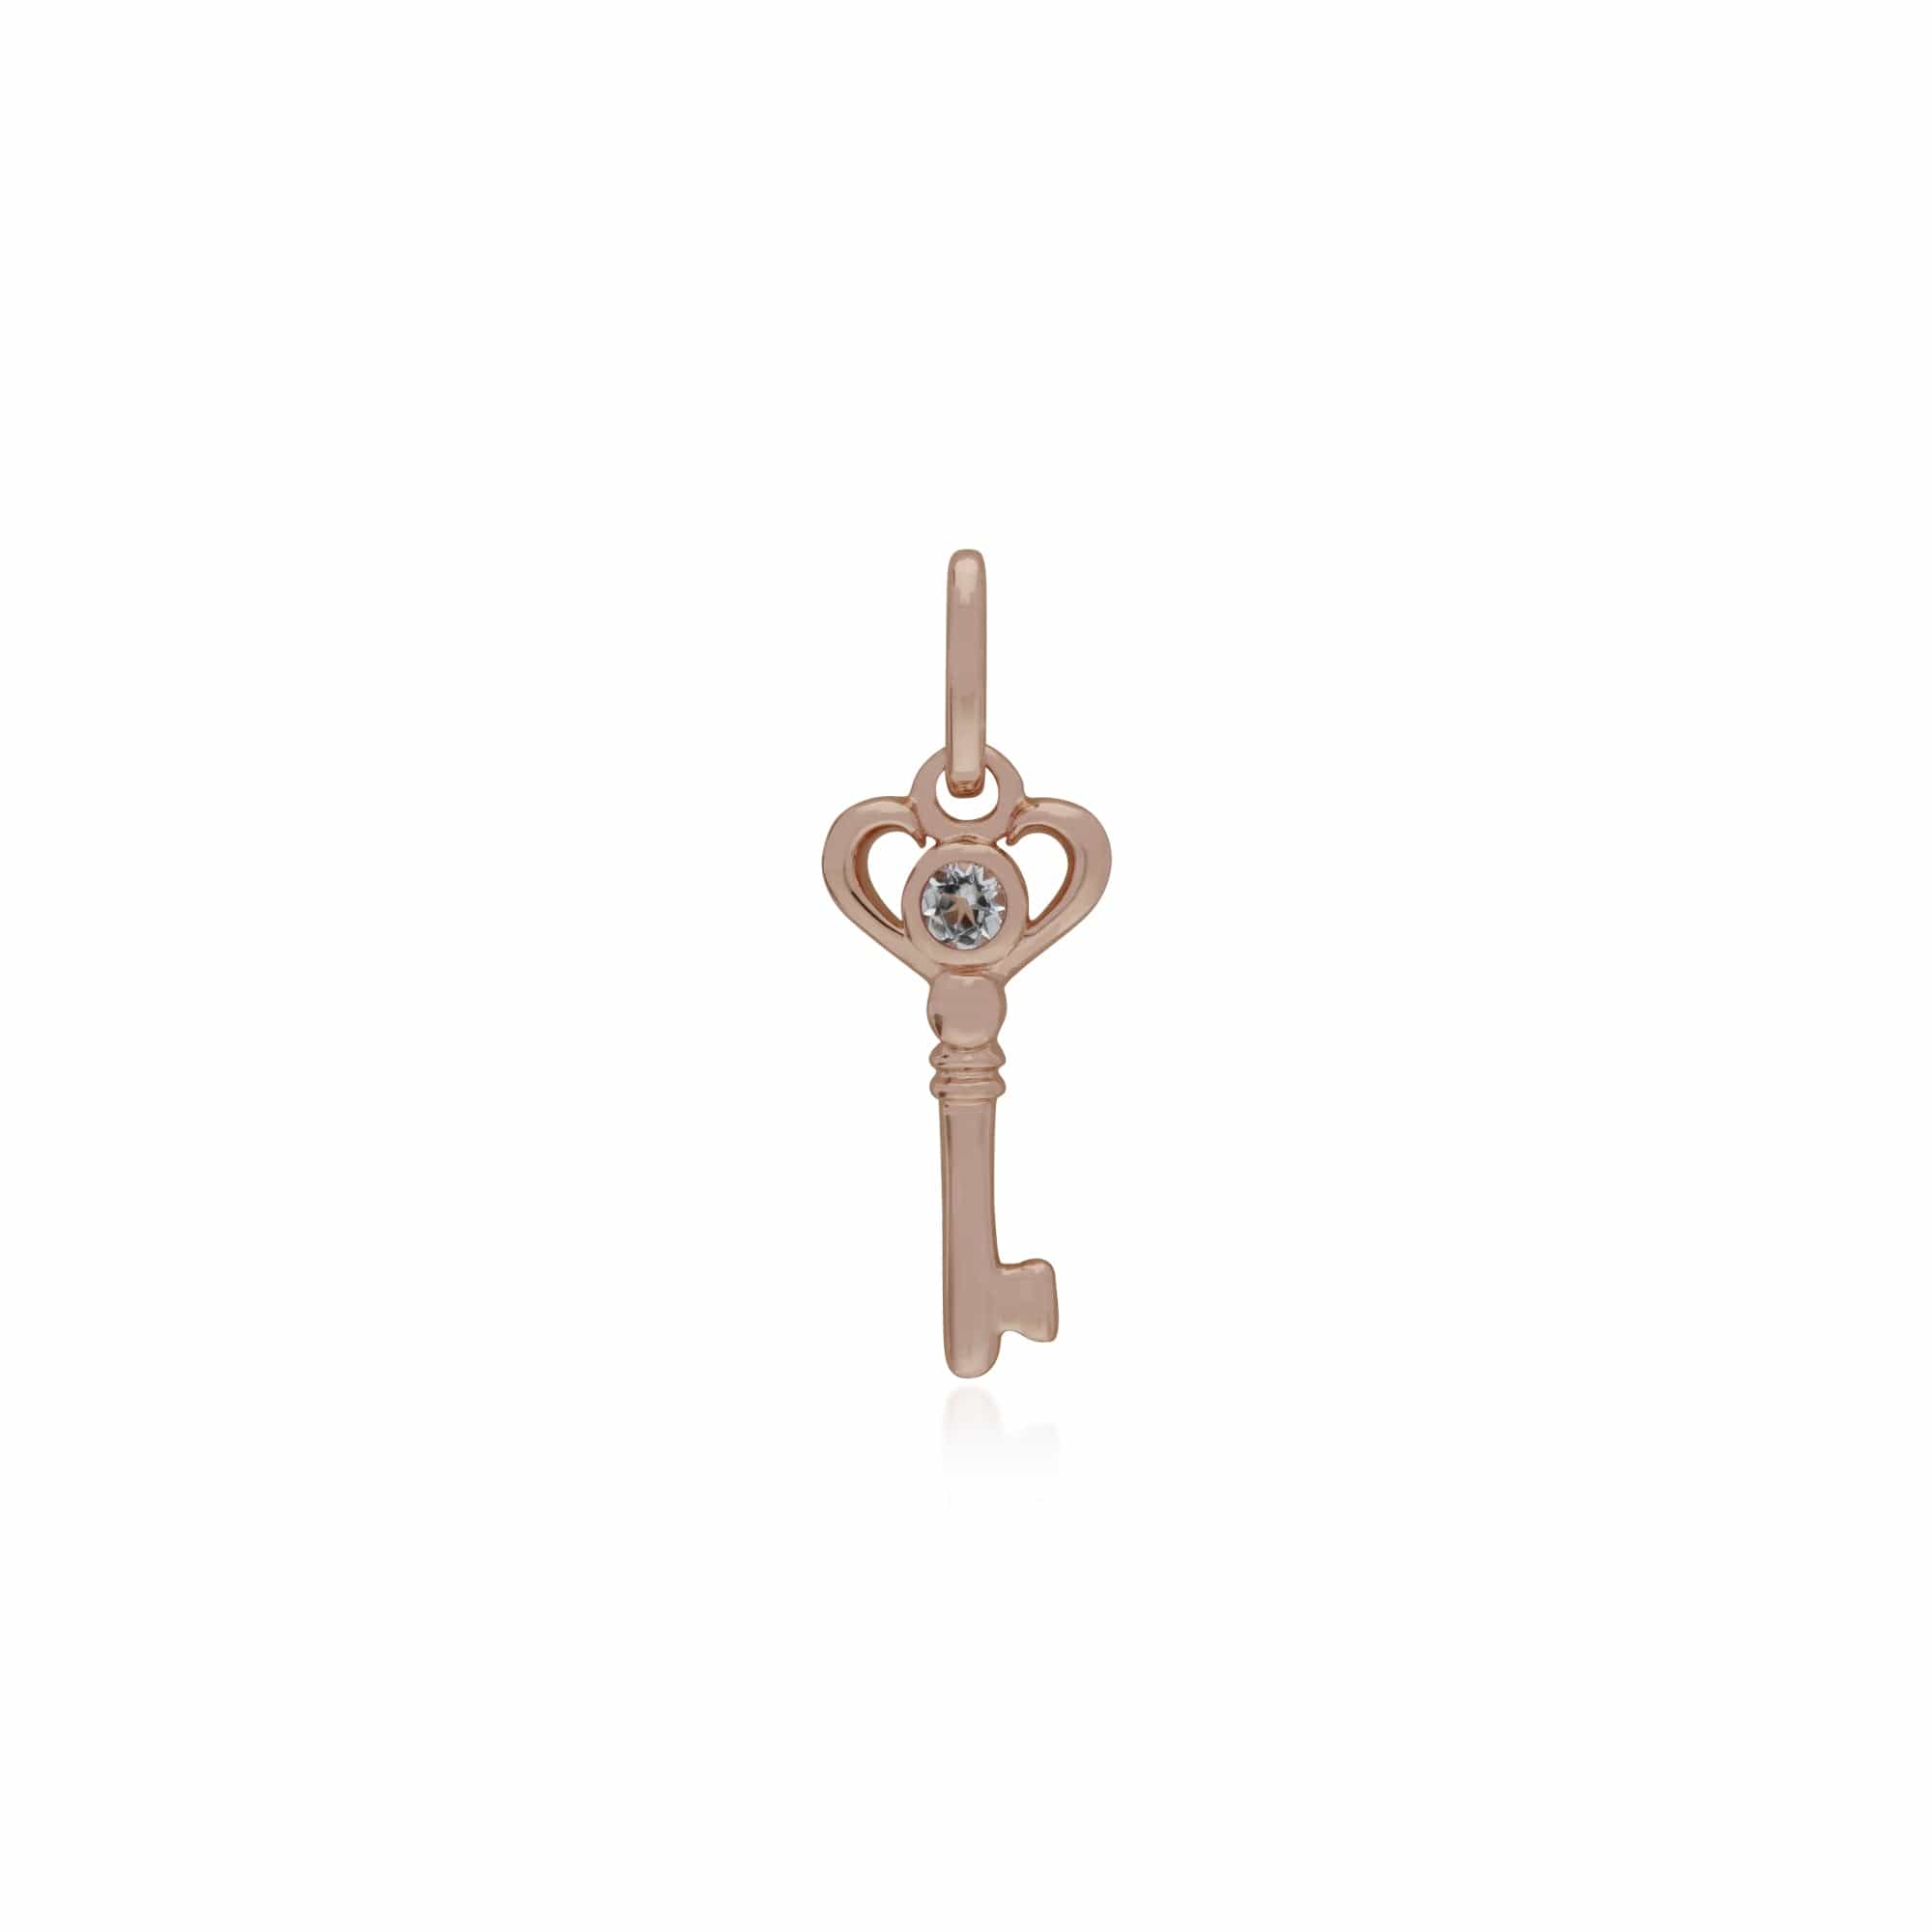 270P026310925-270P026901925 Classic Heart Lock Pendant & Clear Topaz Key Charm in Rose Gold Plated 925 Sterling Silver 2